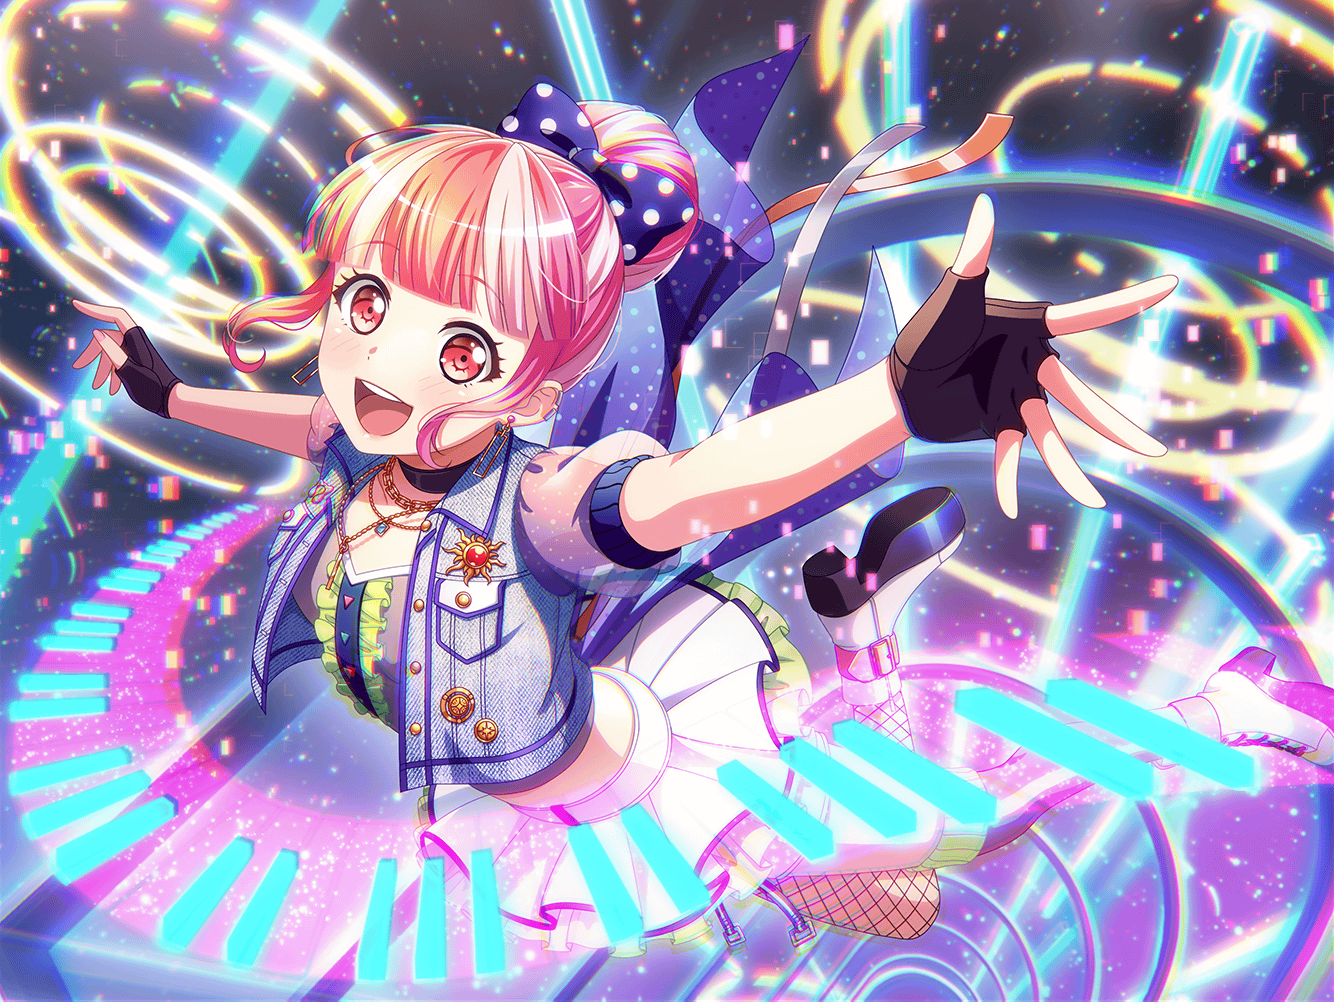 PAREO - Exciting Performance  Bestdori! - The Ultimate BanG Dream